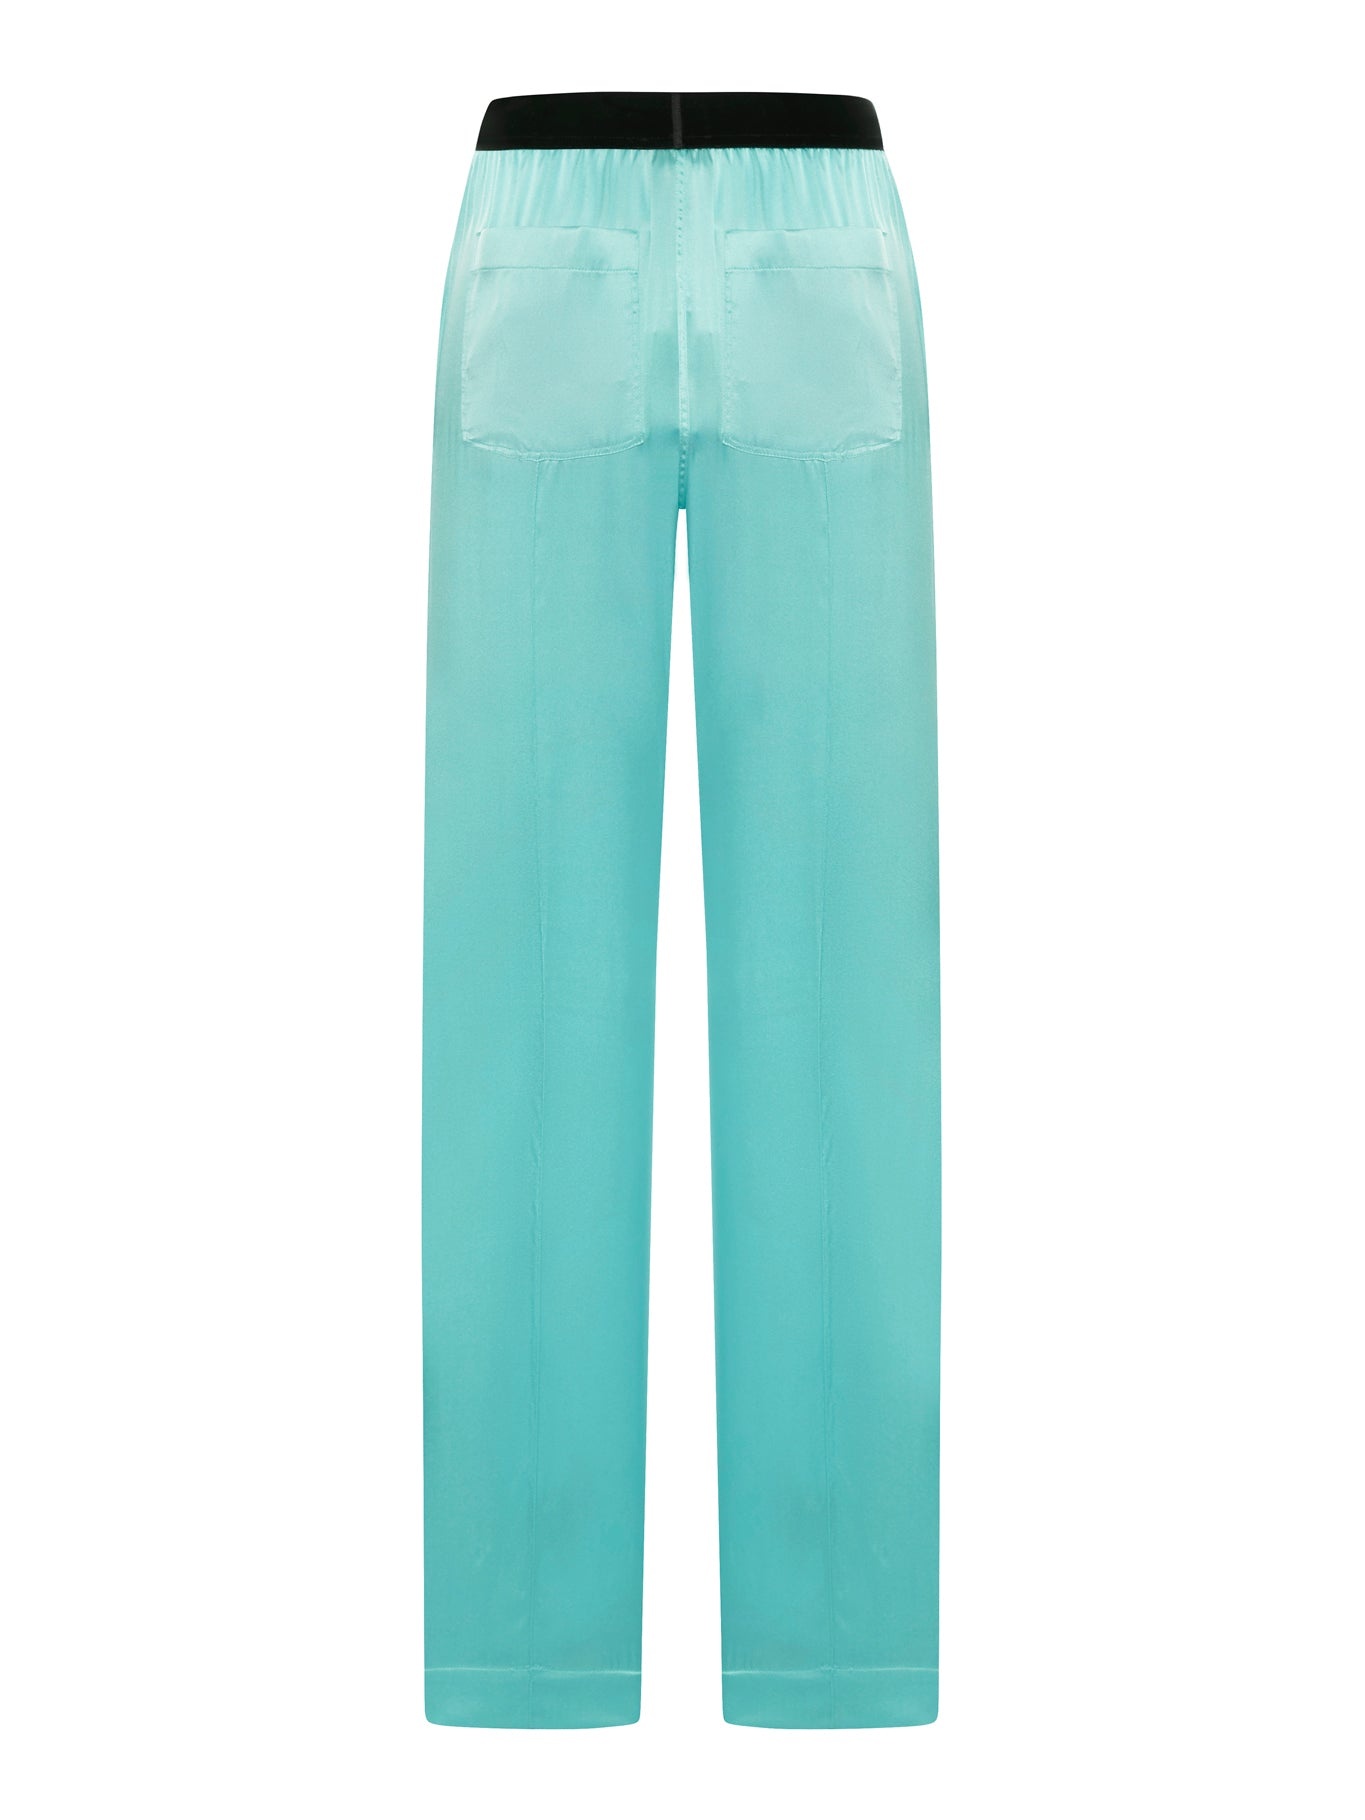 FLOWING TROUSERS - 2